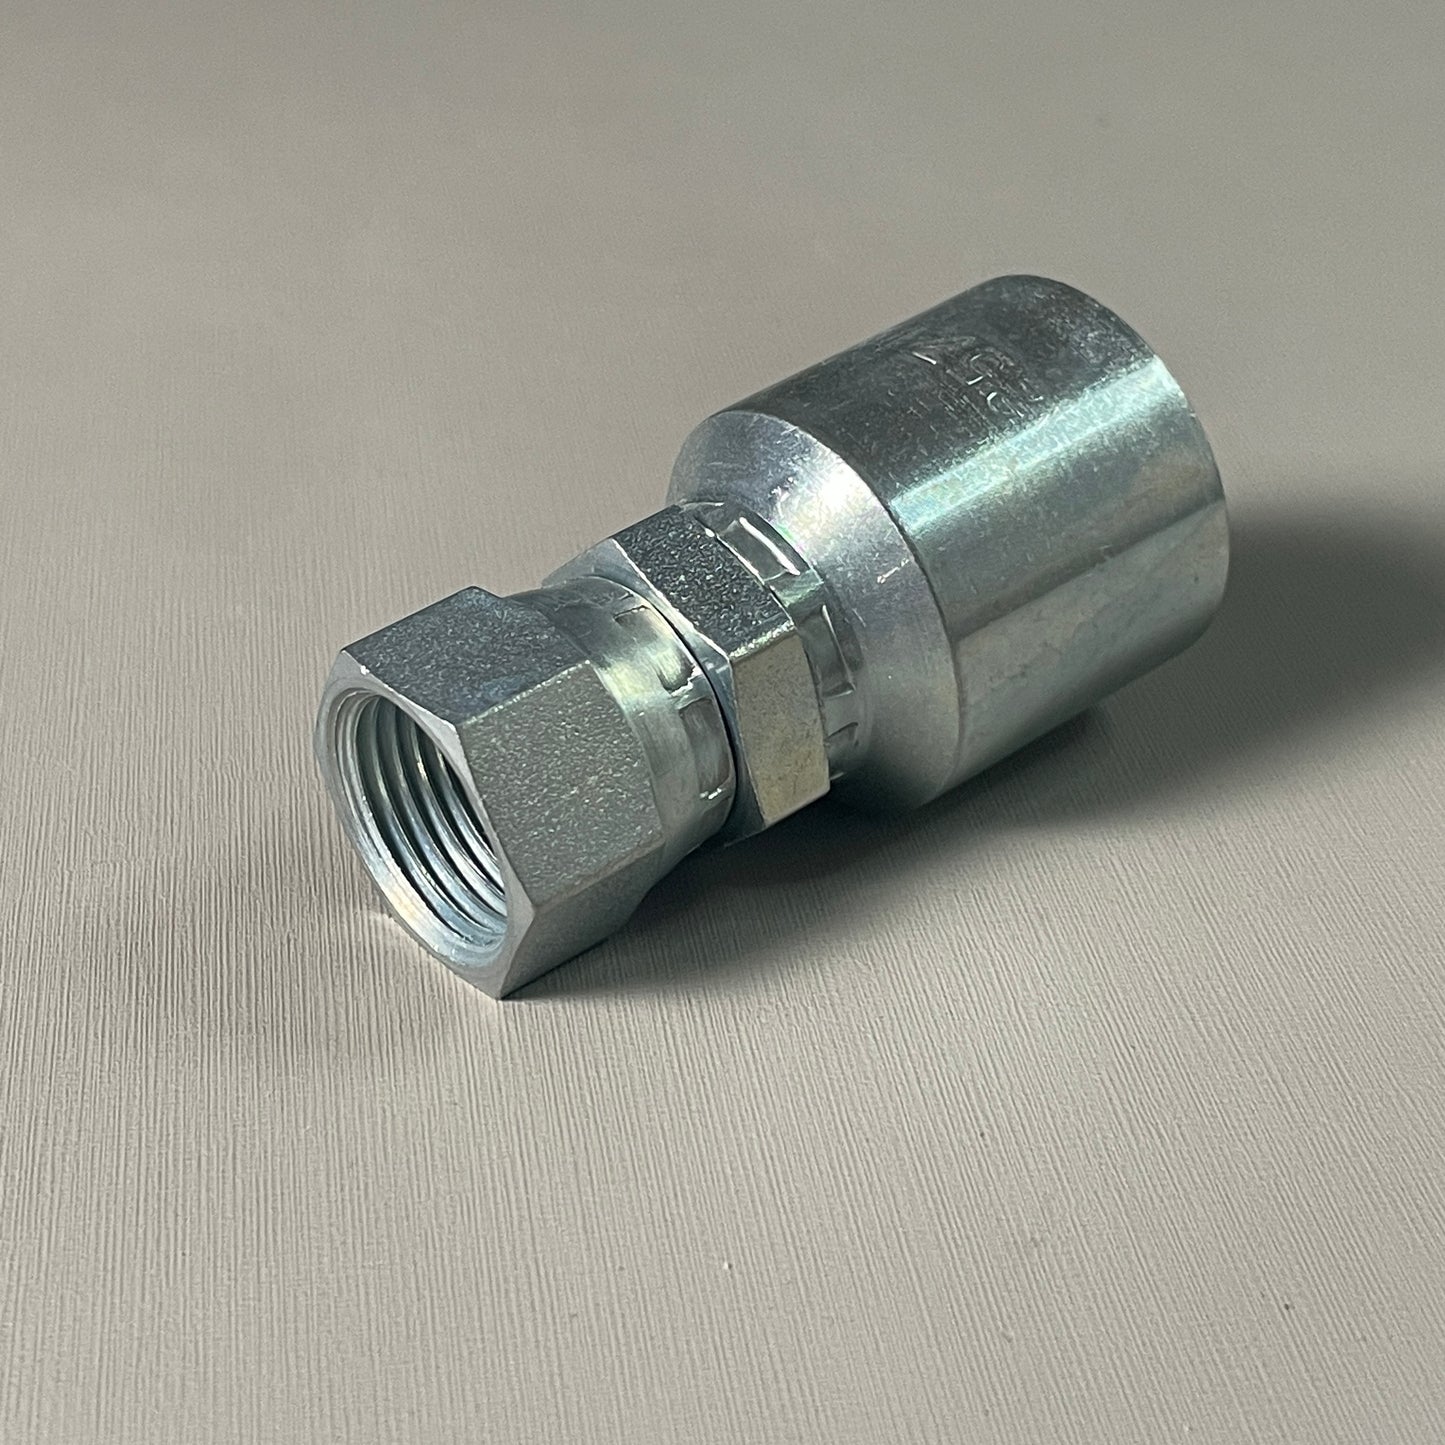 DAYCO Hydraulic Coupling Adapter 1/2" x 2.57" Steel Straight Female Swivel Permanent Crimp 100650 (New)